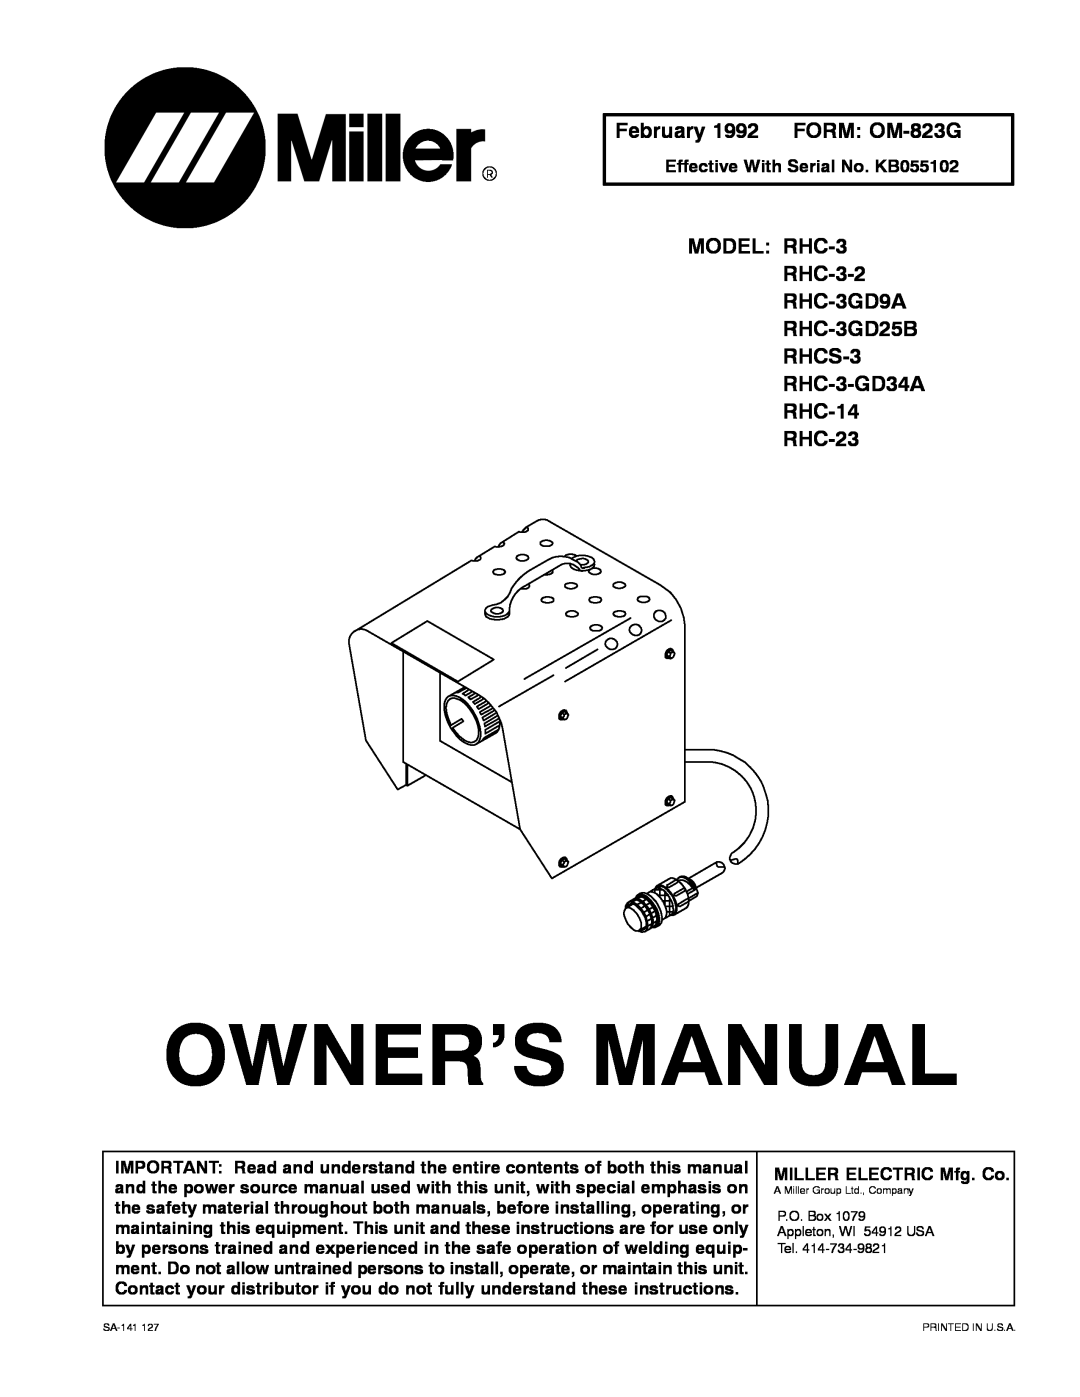 Miller Electric RHCS-3 owner manual February 1992 FORM OM-823G, RHC-23, Effective With Serial No. KB055102, Owner’S Manual 